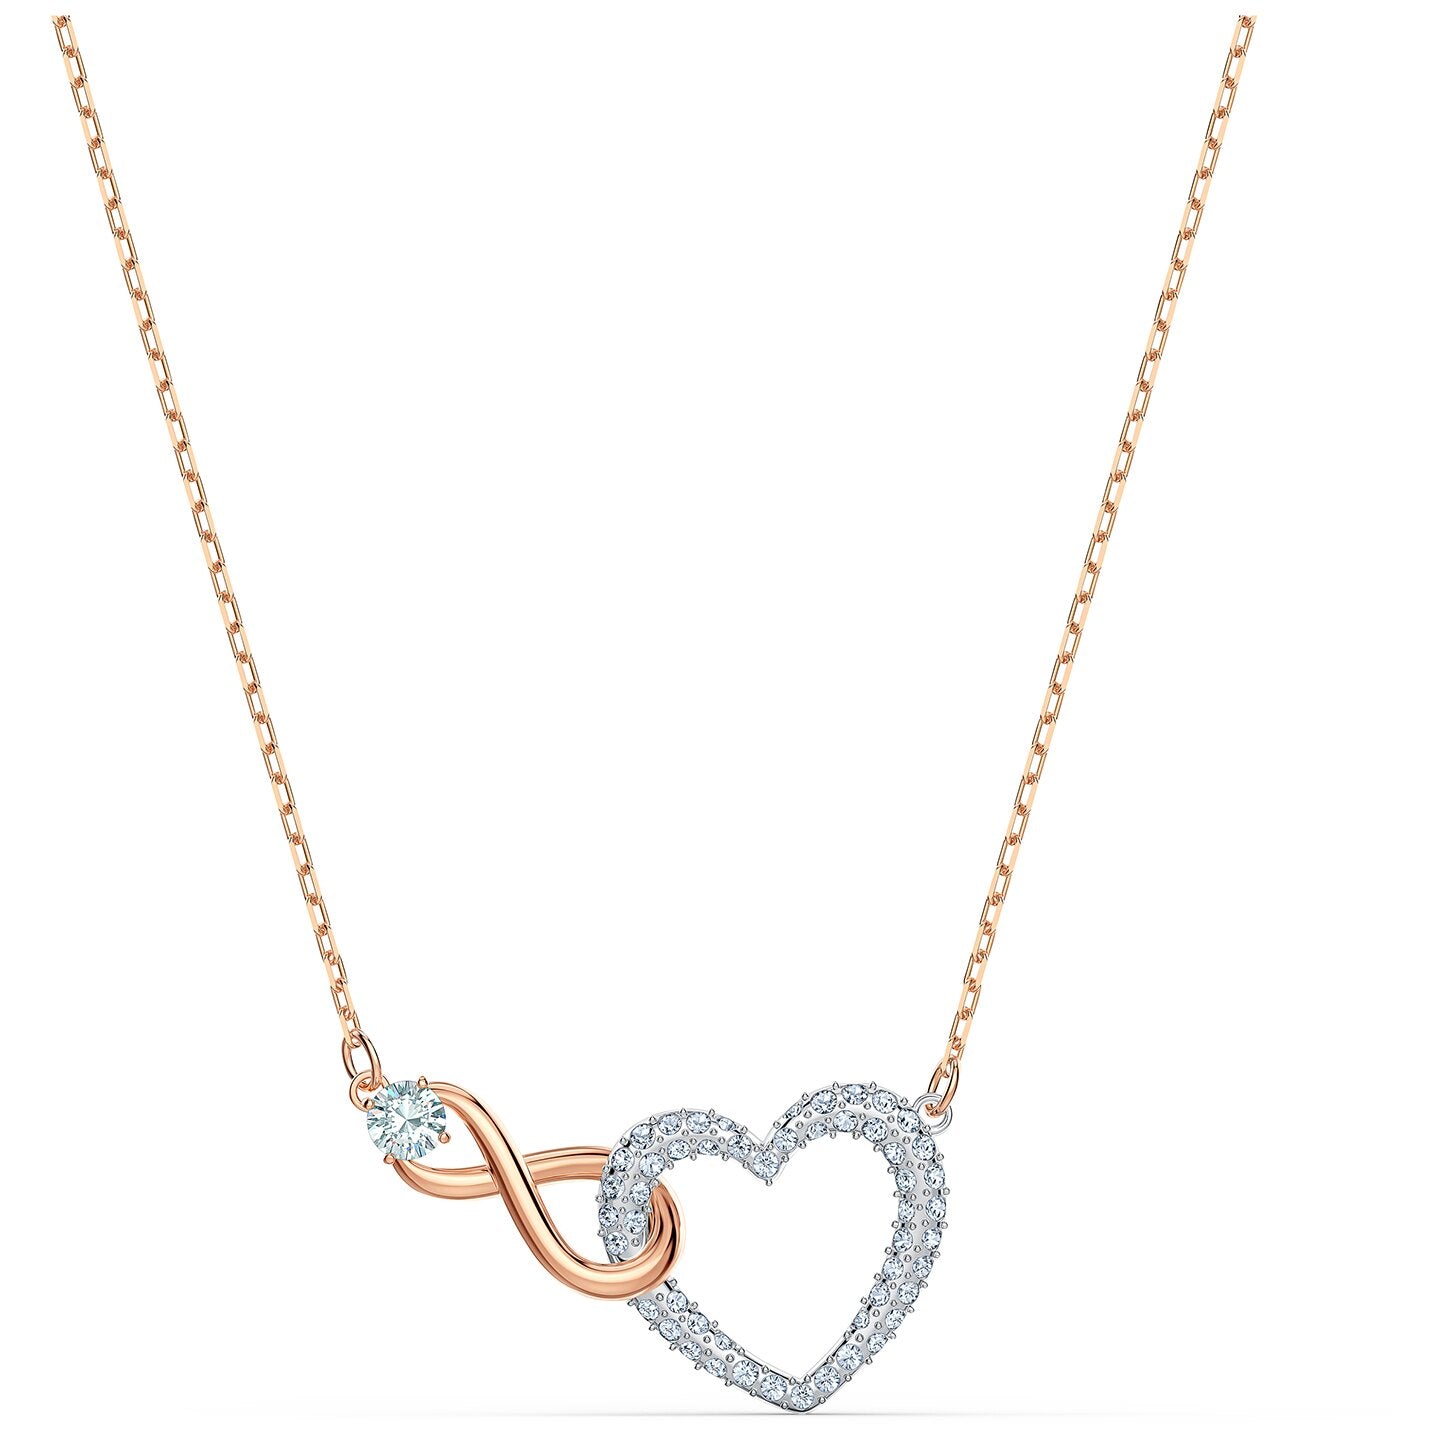 INFINITY HEART NECKLACE, WHITE, MIXED METAL FINISH